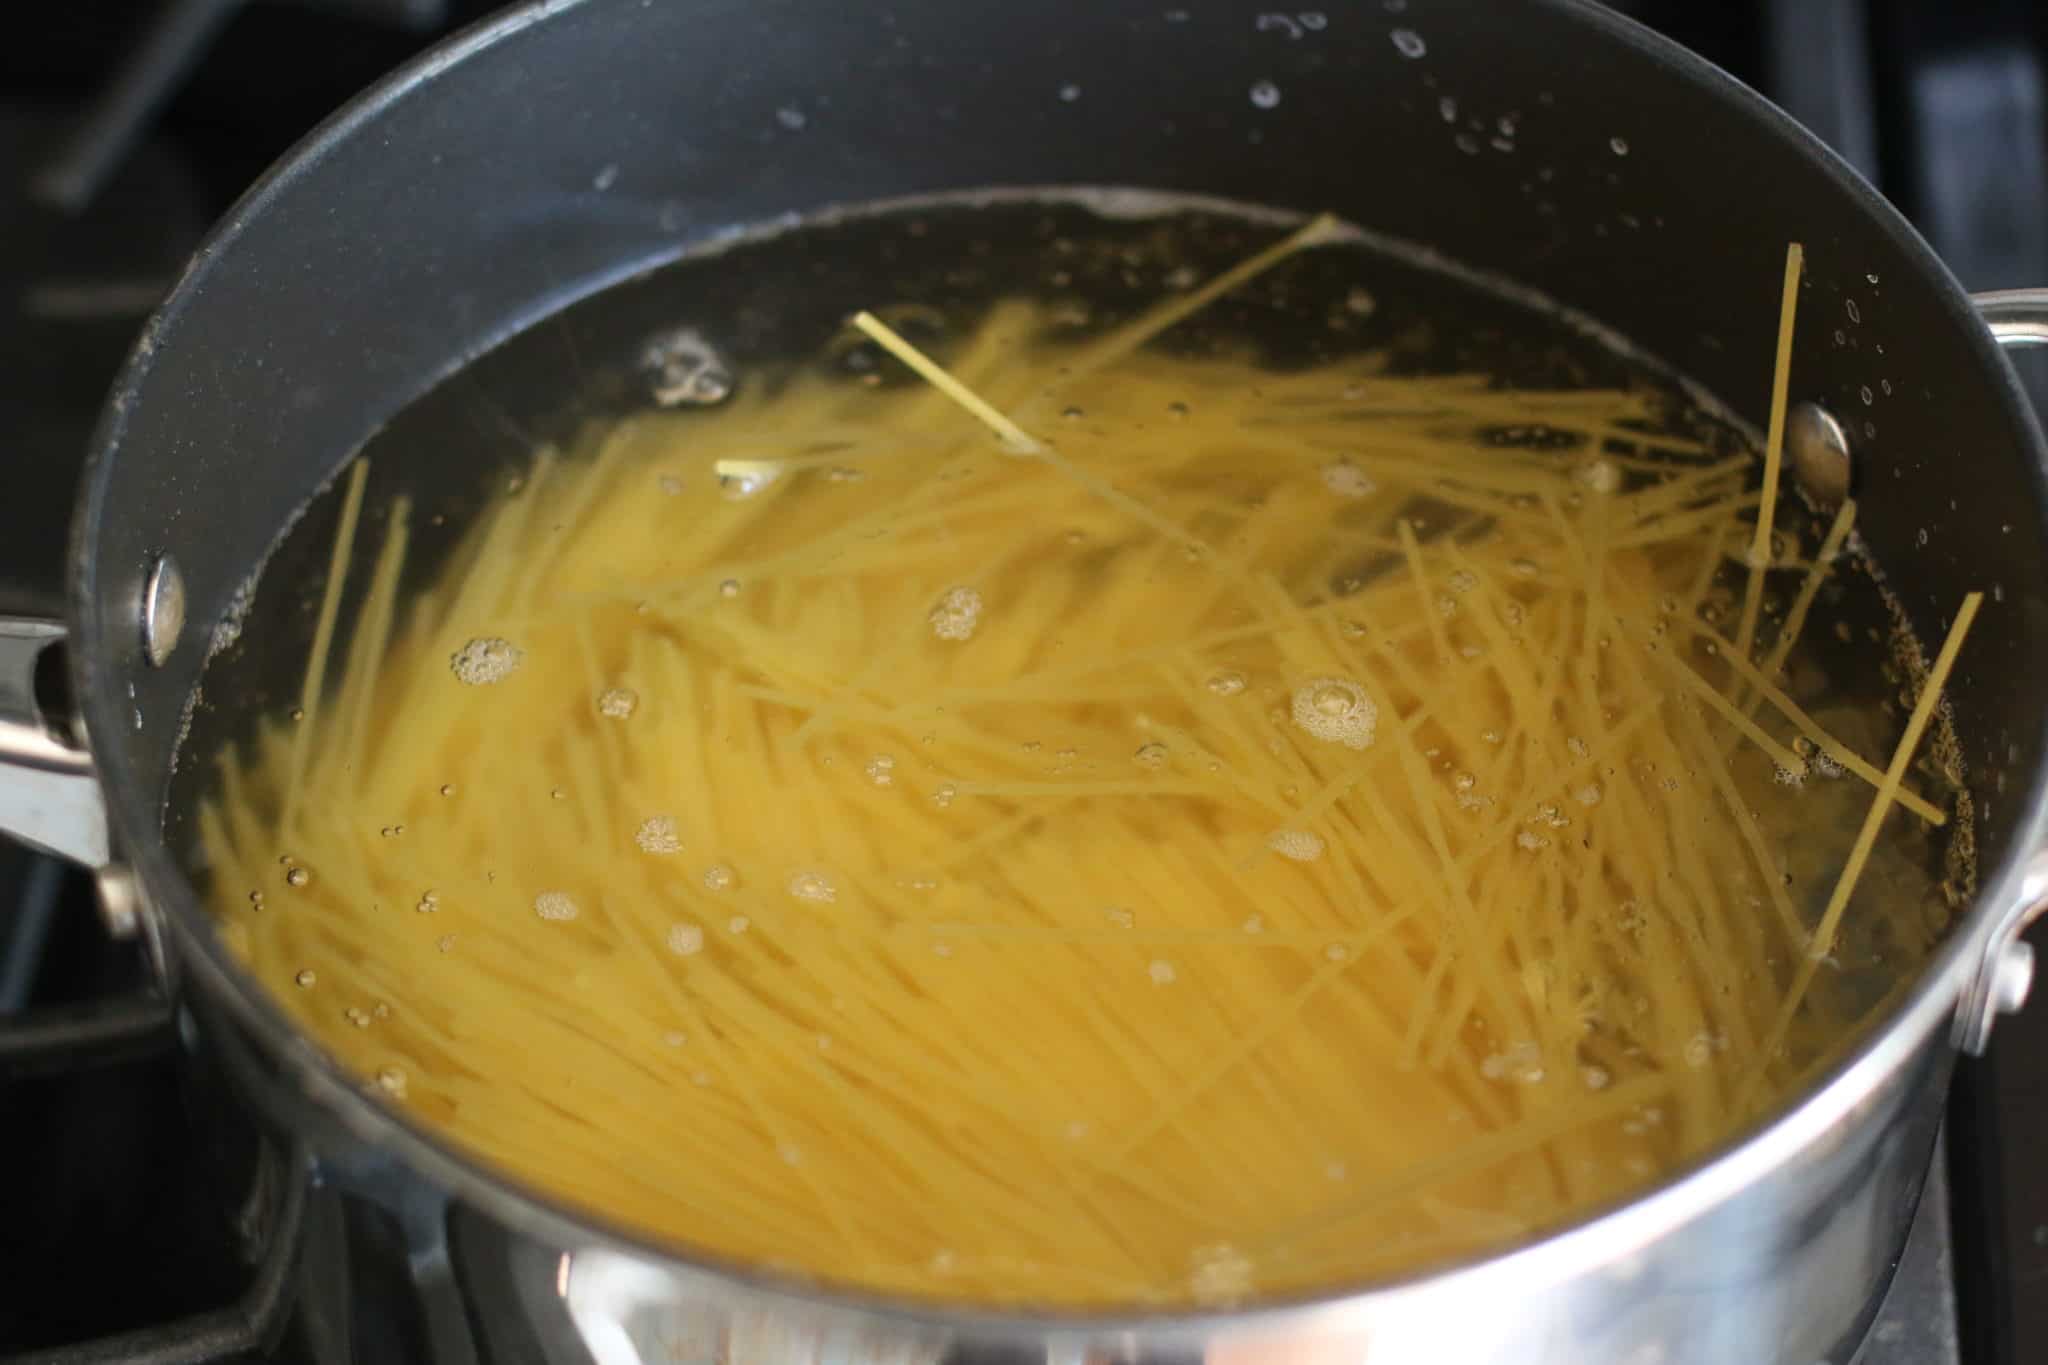 pot sized spaghetti noodles cooking in pot of boiling water.